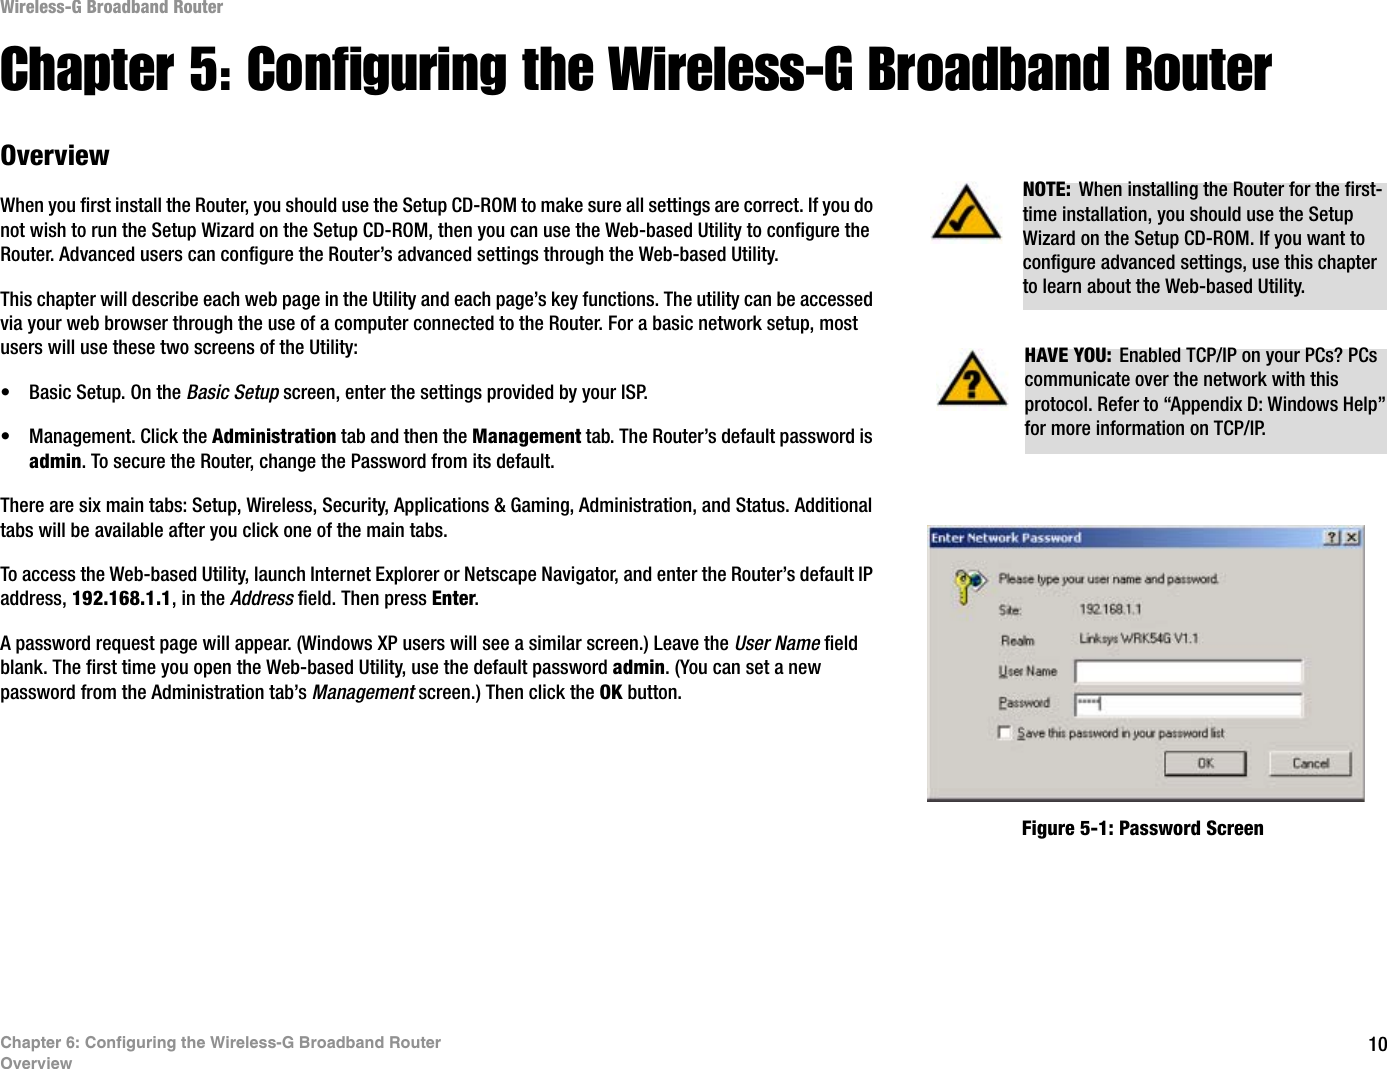 10Chapter 6: Configuring the Wireless-G Broadband RouterOverviewWireless-G Broadband RouterChapter 5: Configuring the Wireless-G Broadband RouterOverviewWhen you first install the Router, you should use the Setup CD-ROM to make sure all settings are correct. If you do not wish to run the Setup Wizard on the Setup CD-ROM, then you can use the Web-based Utility to configure the Router. Advanced users can configure the Router’s advanced settings through the Web-based Utility.This chapter will describe each web page in the Utility and each page’s key functions. The utility can be accessed via your web browser through the use of a computer connected to the Router. For a basic network setup, most users will use these two screens of the Utility:• Basic Setup. On the Basic Setup screen, enter the settings provided by your ISP.• Management. Click the Administration tab and then the Management tab. The Router’s default password is admin. To secure the Router, change the Password from its default.There are six main tabs: Setup, Wireless, Security, Applications &amp; Gaming, Administration, and Status. Additional tabs will be available after you click one of the main tabs.To access the Web-based Utility, launch Internet Explorer or Netscape Navigator, and enter the Router’s default IP address, 192.168.1.1, in the Address field. Then press Enter.A password request page will appear. (Windows XP users will see a similar screen.) Leave the User Name field blank. The first time you open the Web-based Utility, use the default password admin. (You can set a new password from the Administration tab’s Management screen.) Then click the OK button. HAVE YOU:  Enabled TCP/IP on your PCs? PCs communicate over the network with this protocol. Refer to “Appendix D: Windows Help” for more information on TCP/IP.NOTE: When installing the Router for the first-time installation, you should use the Setup Wizard on the Setup CD-ROM. If you want to configure advanced settings, use this chapter to learn about the Web-based Utility.Figure 5-1: Password Screen